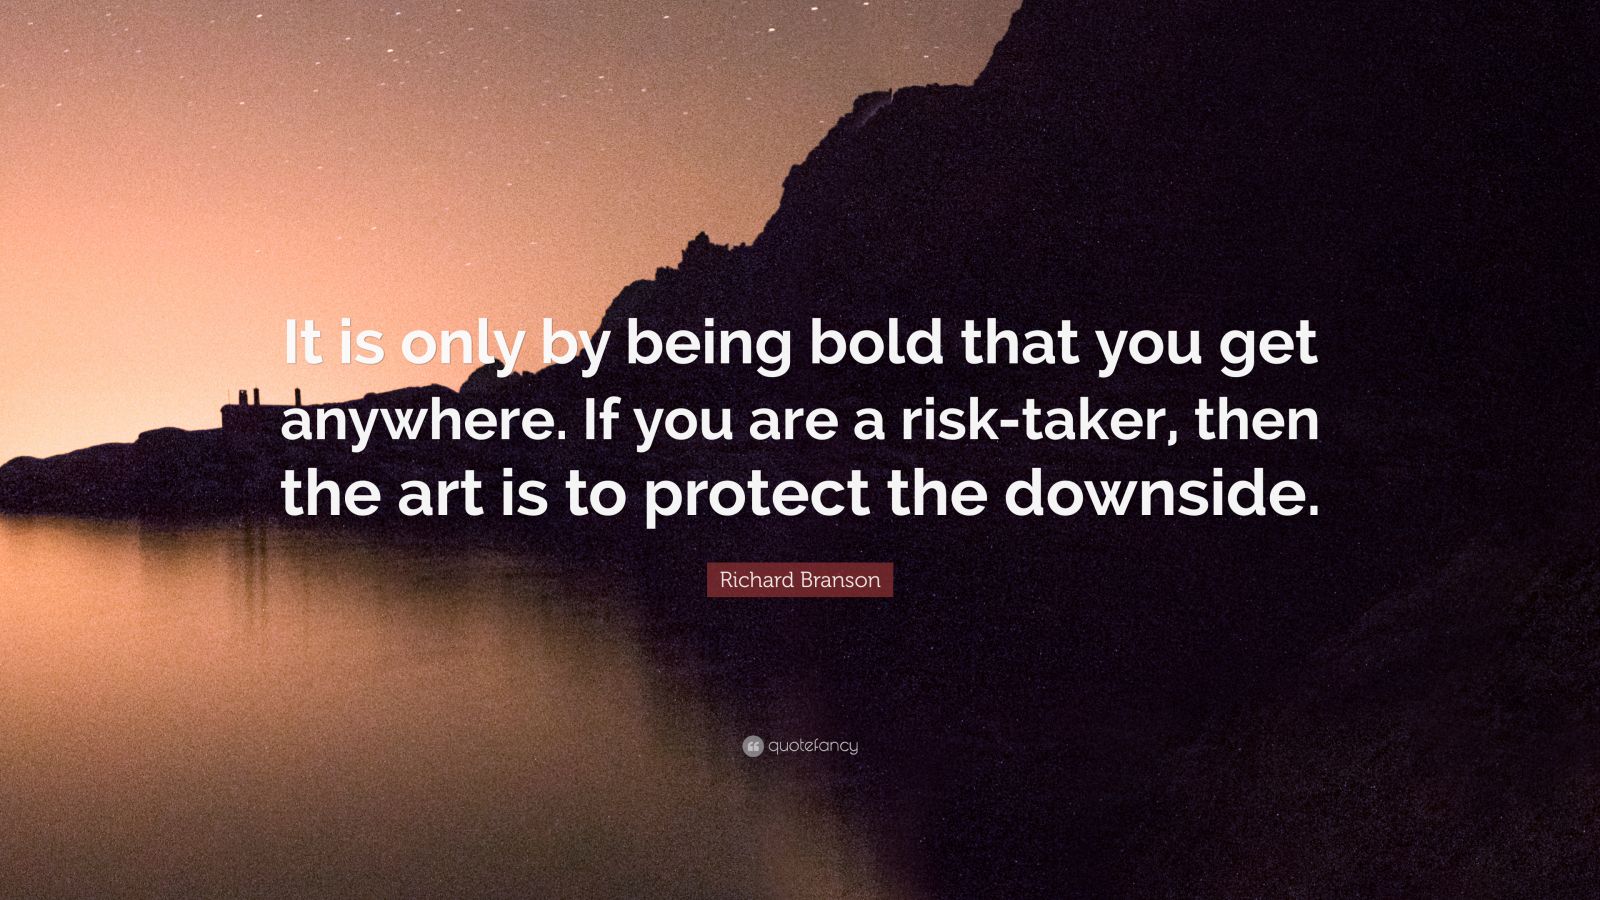 Richard Branson Quote “it Is Only By Being Bold That You Get Anywhere If You Are A Risk Taker